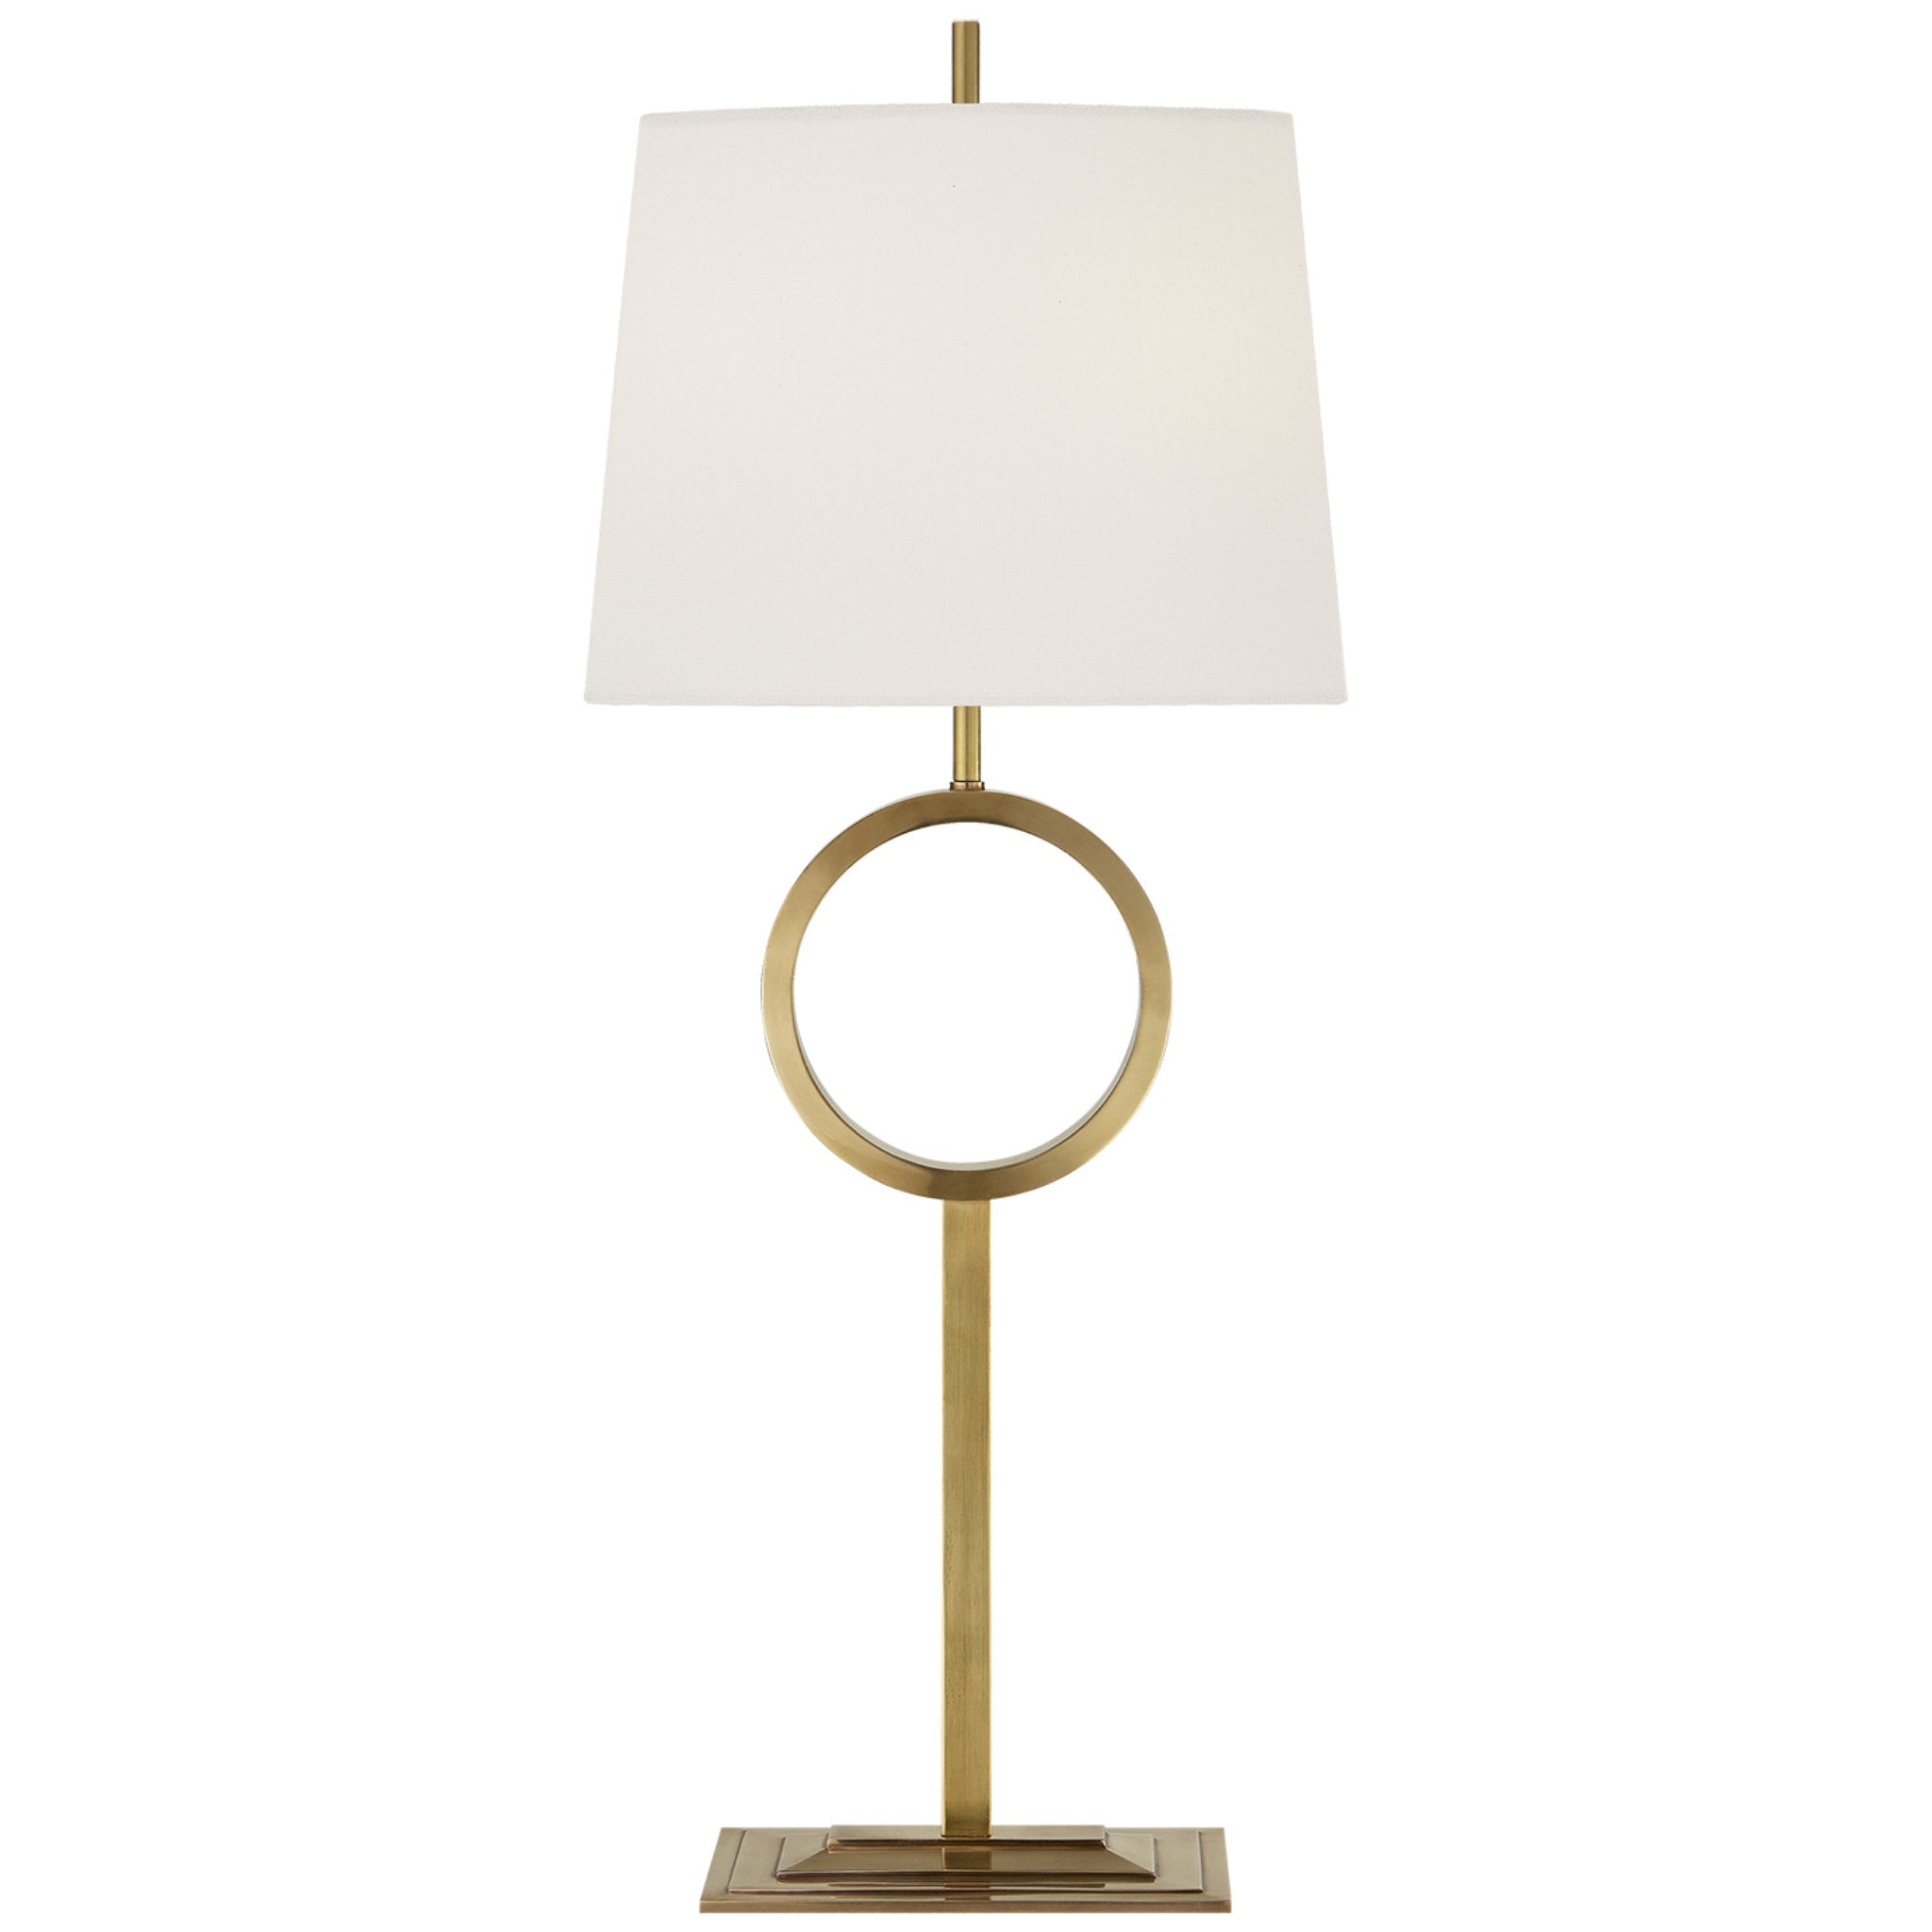 Thomas O'Brien Simone Medium Buffet Lamp in Hand-Rubbed Antique Brass with Linen Shade